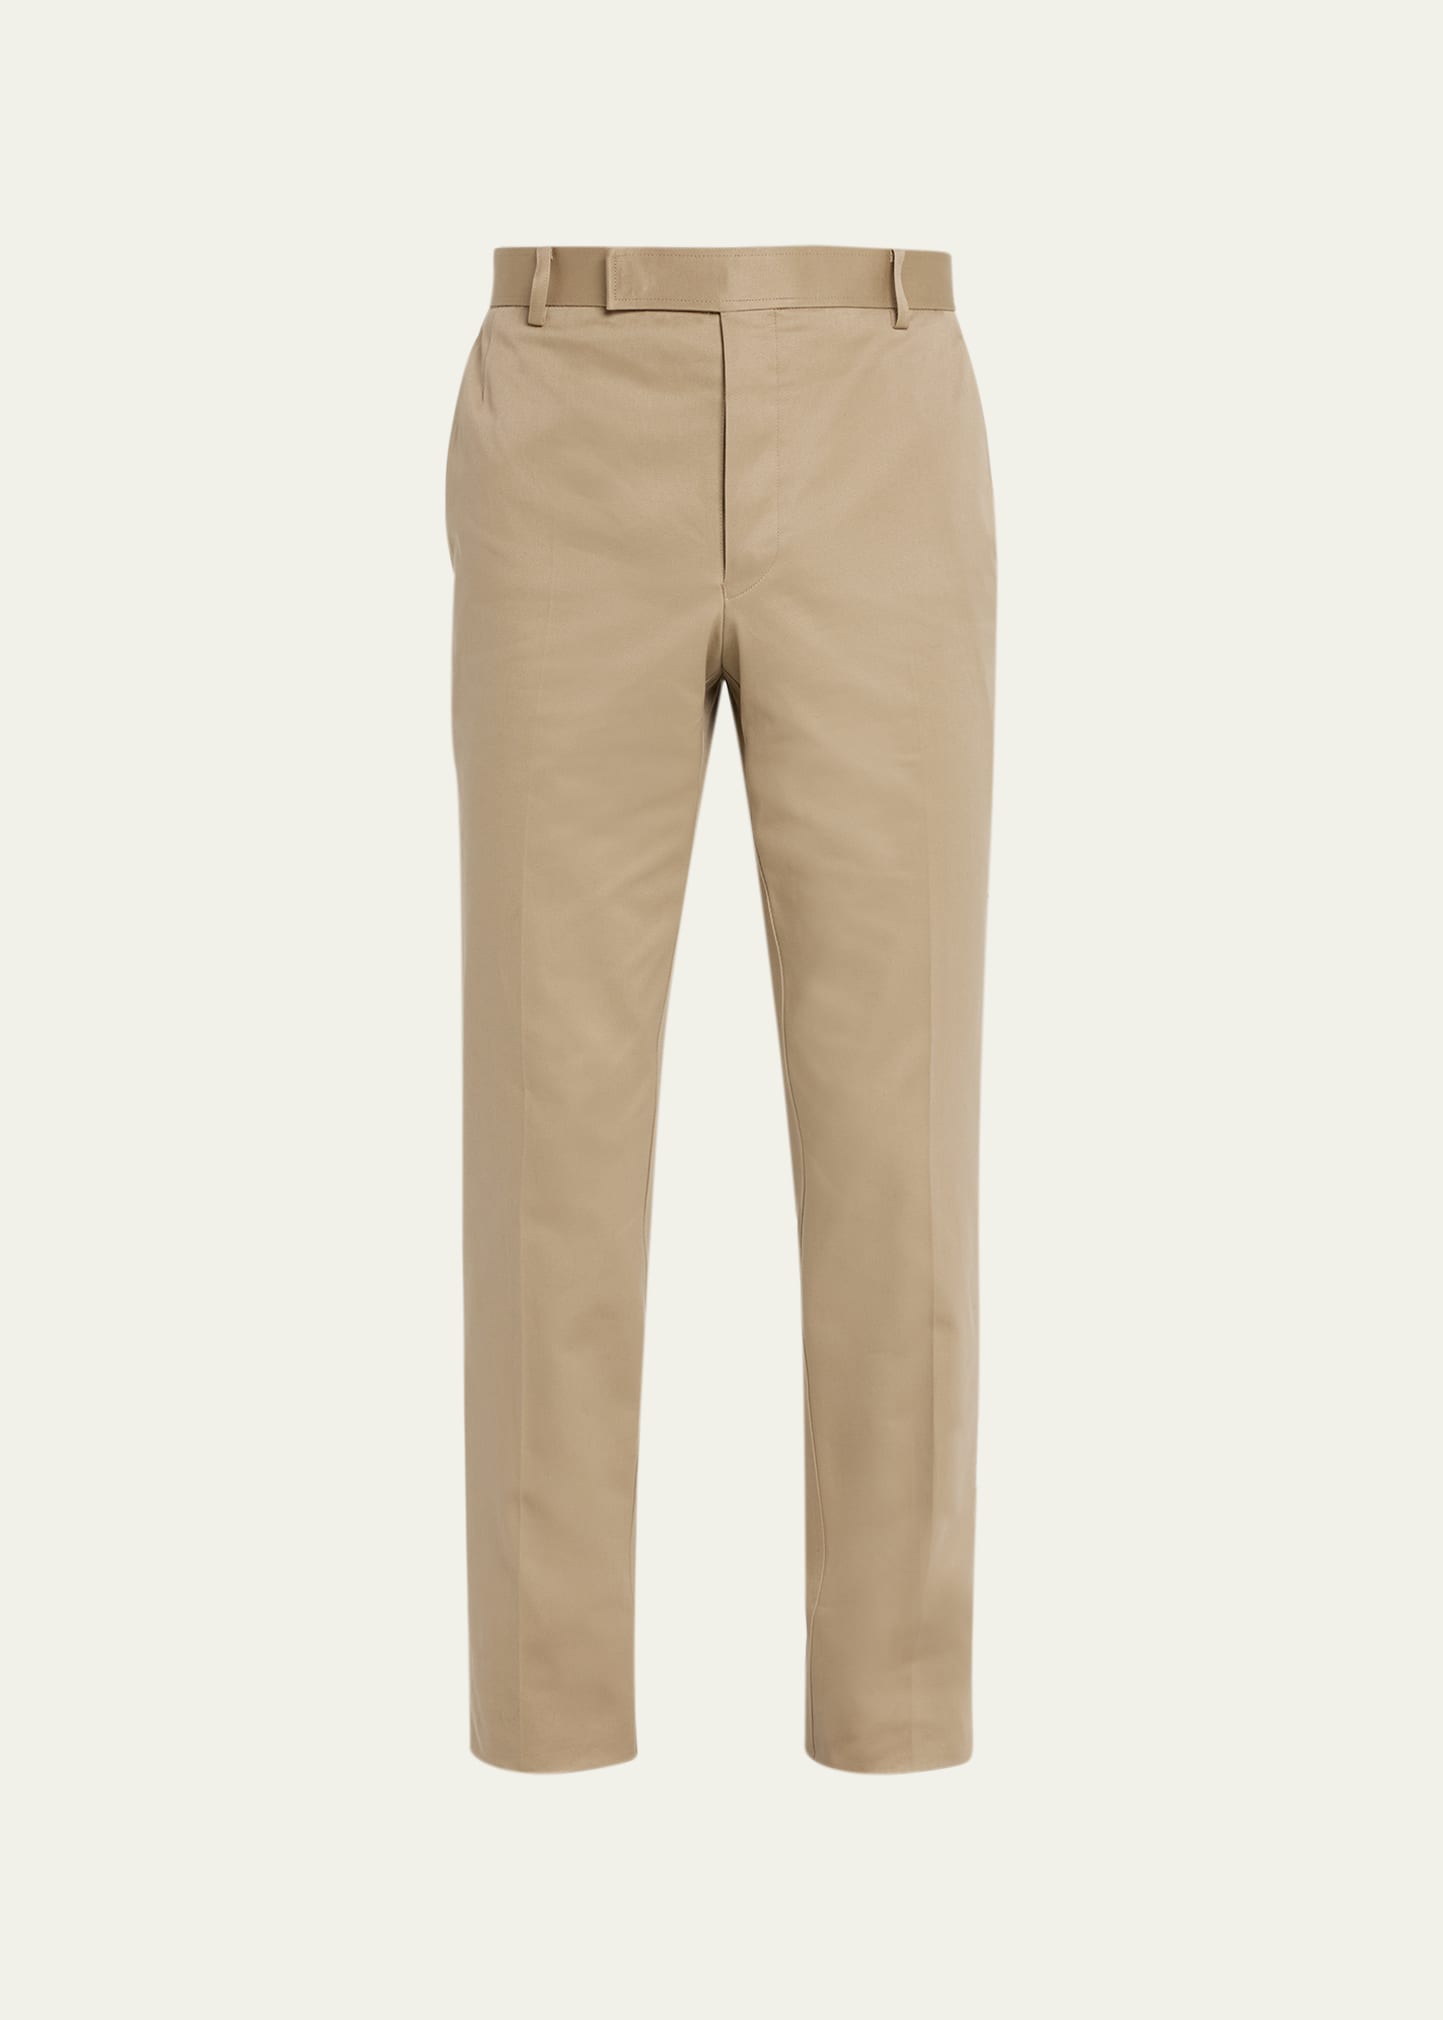 Unstructured Twill Chino Pants